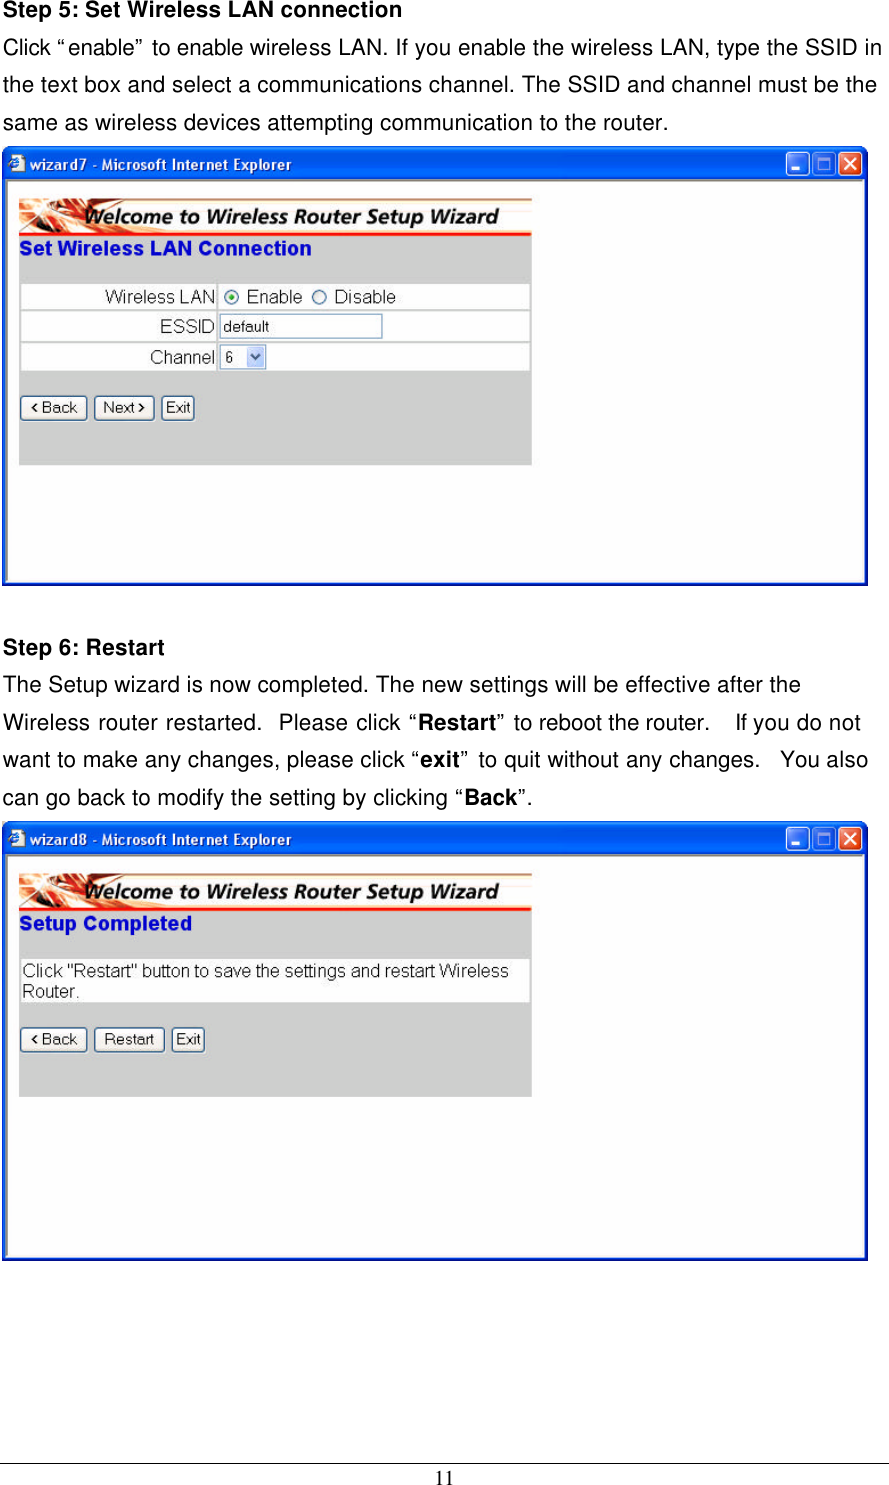 11 Step 5: Set Wireless LAN connection Click “enable” to enable wireless LAN. If you enable the wireless LAN, type the SSID in the text box and select a communications channel. The SSID and channel must be the same as wireless devices attempting communication to the router.   Step 6: Restart The Setup wizard is now completed. The new settings will be effective after the Wireless router restarted.  Please click “Restart” to reboot the router.  If you do not want to make any changes, please click “exit” to quit without any changes.  You also can go back to modify the setting by clicking “Back”.   